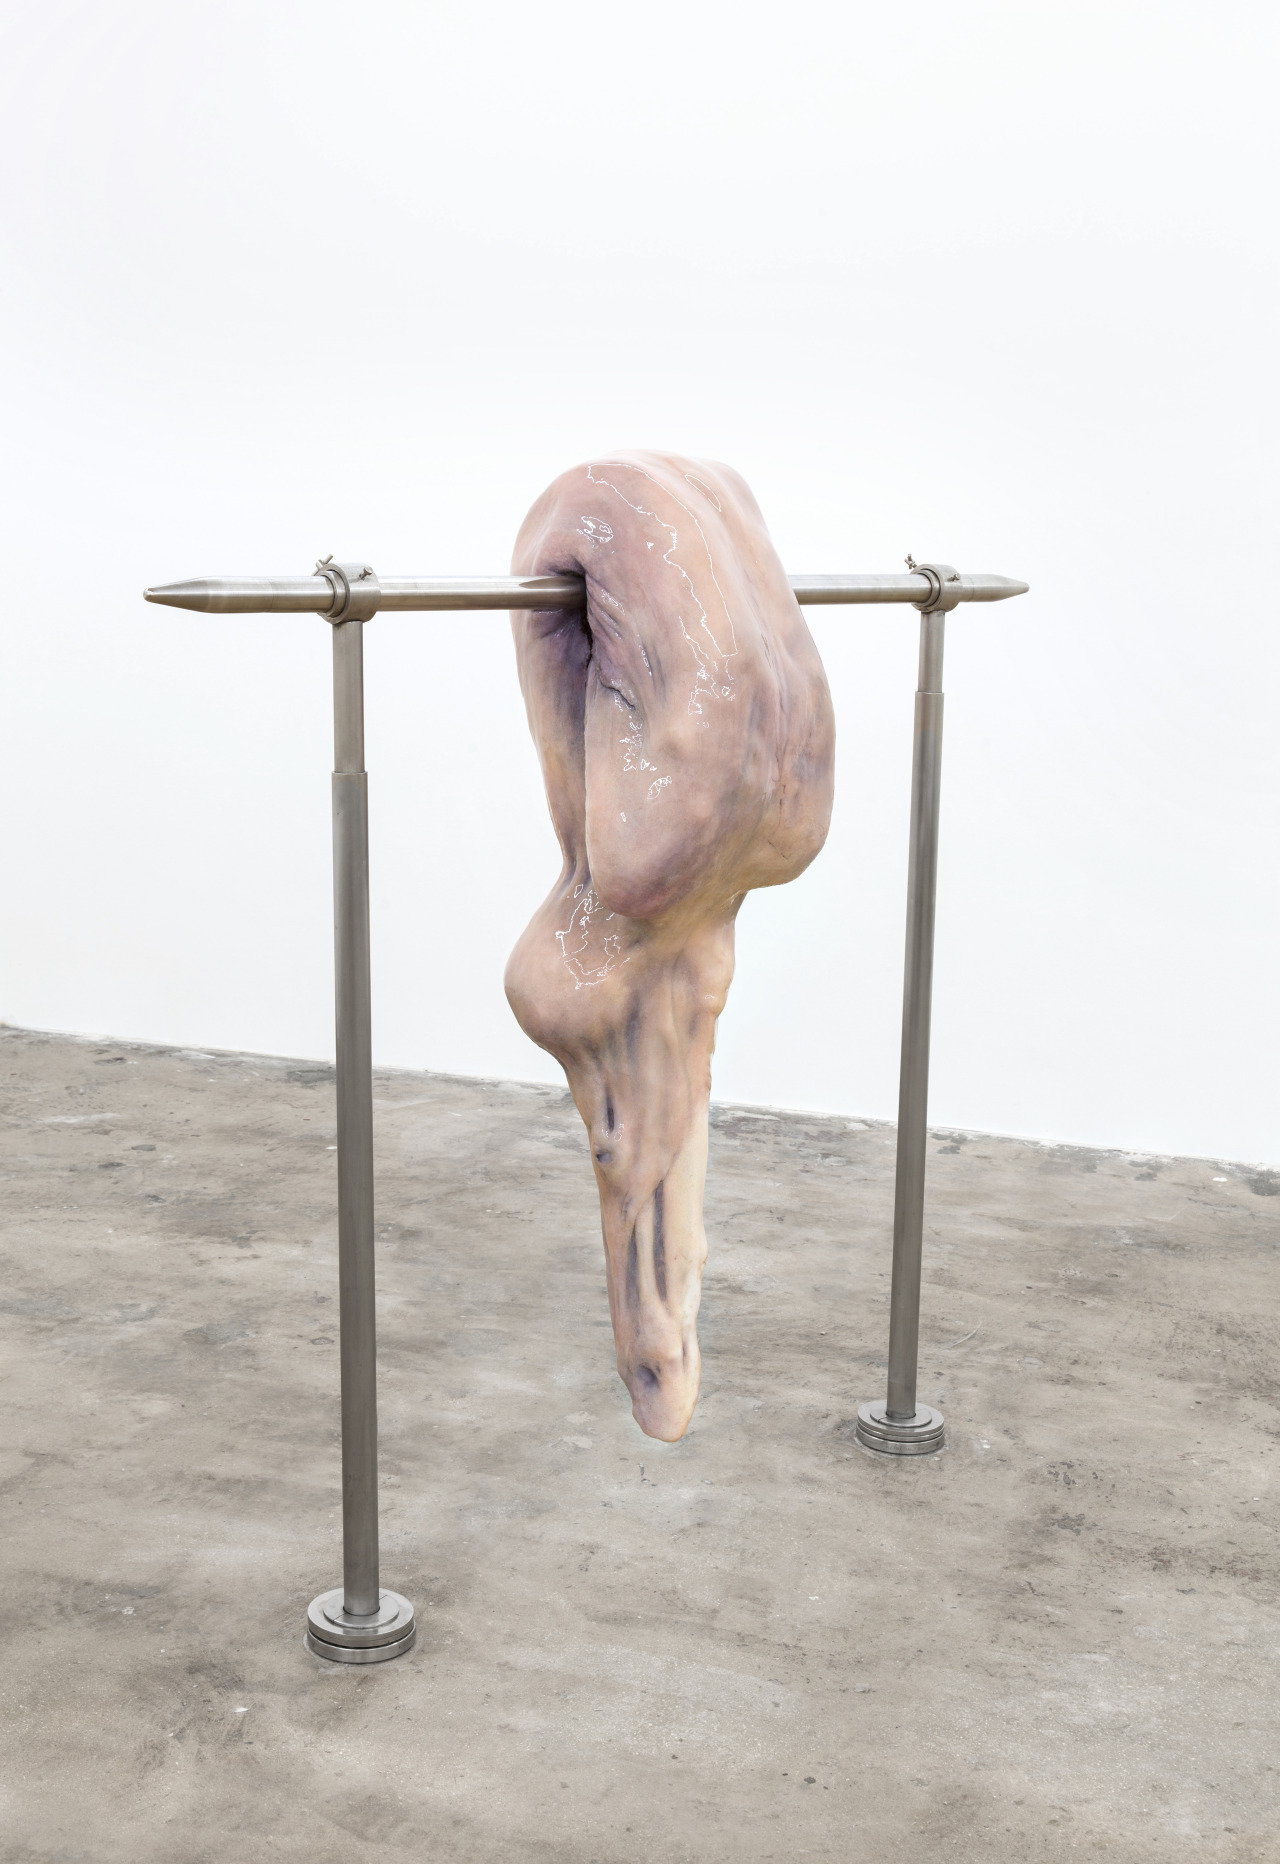 FEATURED ARTIST: Ivana Basic, Sew my eyelids shut from others, 2016.
Wax, silicone, oil paint, weight, r​igidity a​nd stainless steel. C​ourtesy Gallery Diet, Miami.
www.sculpture-center.org